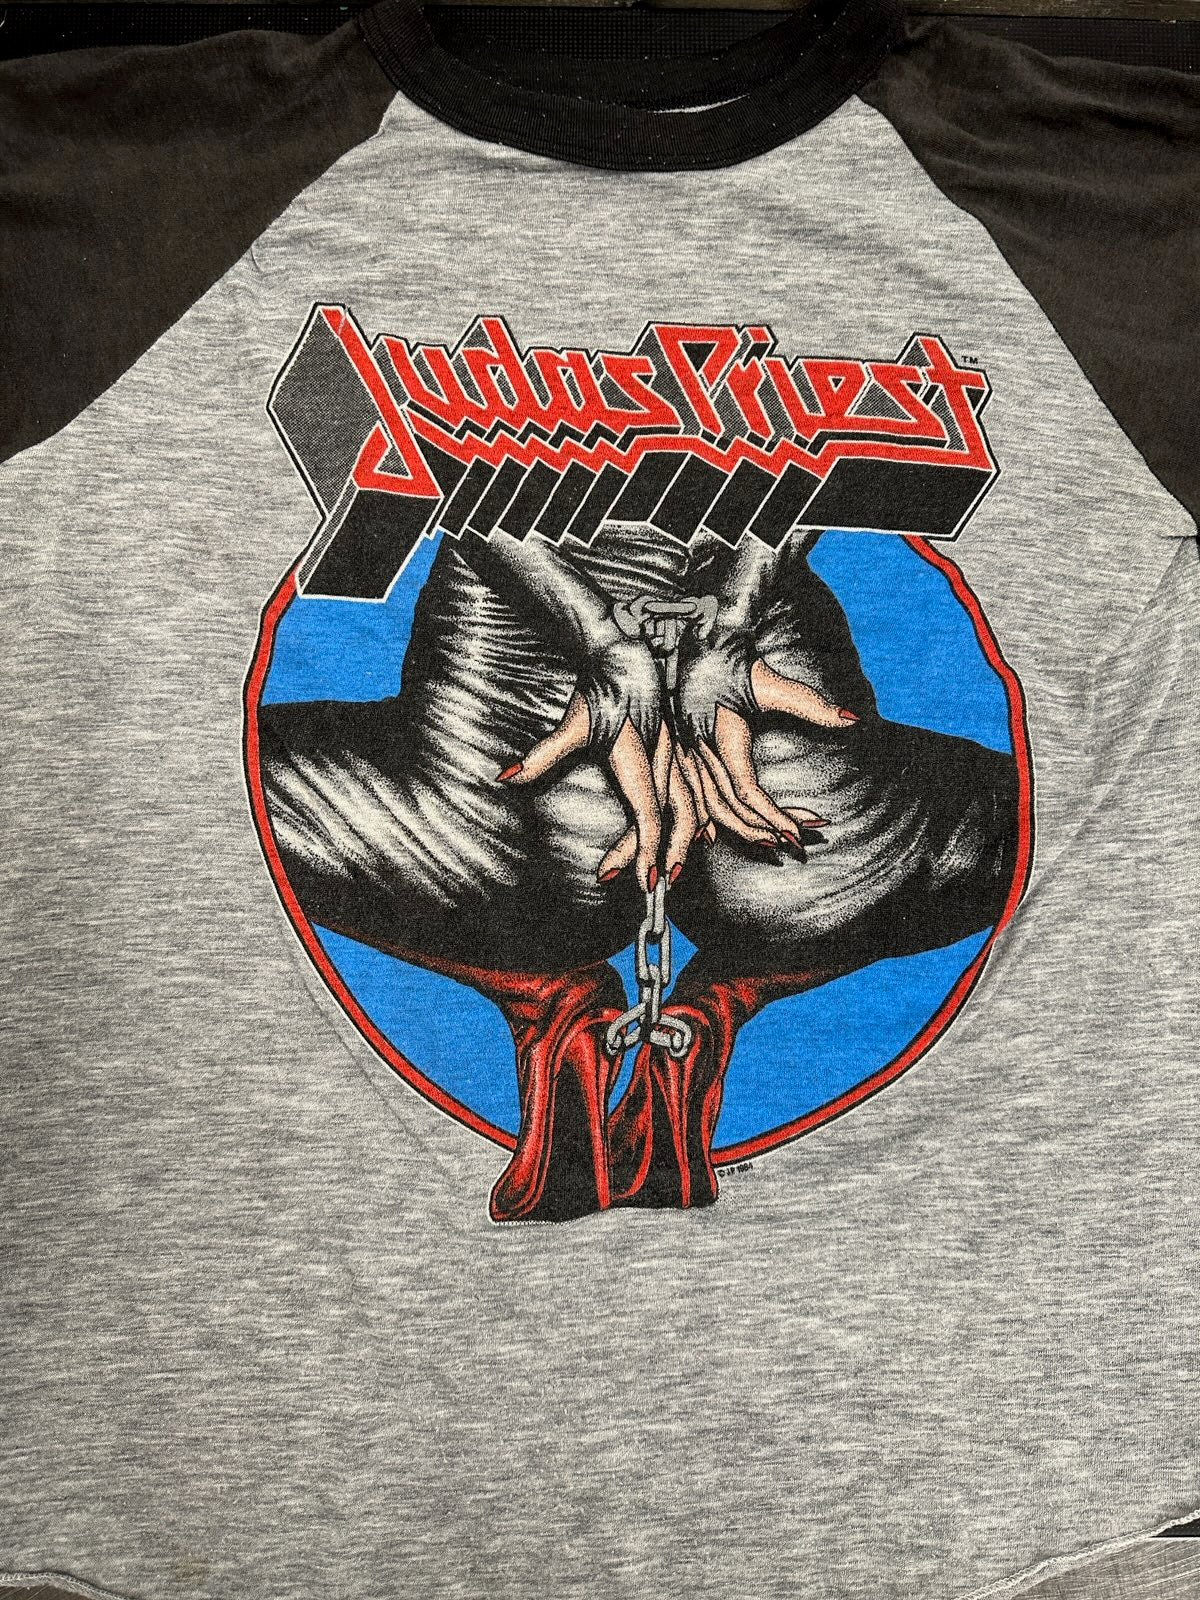 Judas Priest 1984 Defenders Of The Faith Tour Raglan/Baseball T-Shirt, Grey w/Blk Arms, Tagged L (25.5" Long, 19" Pit To Pit)